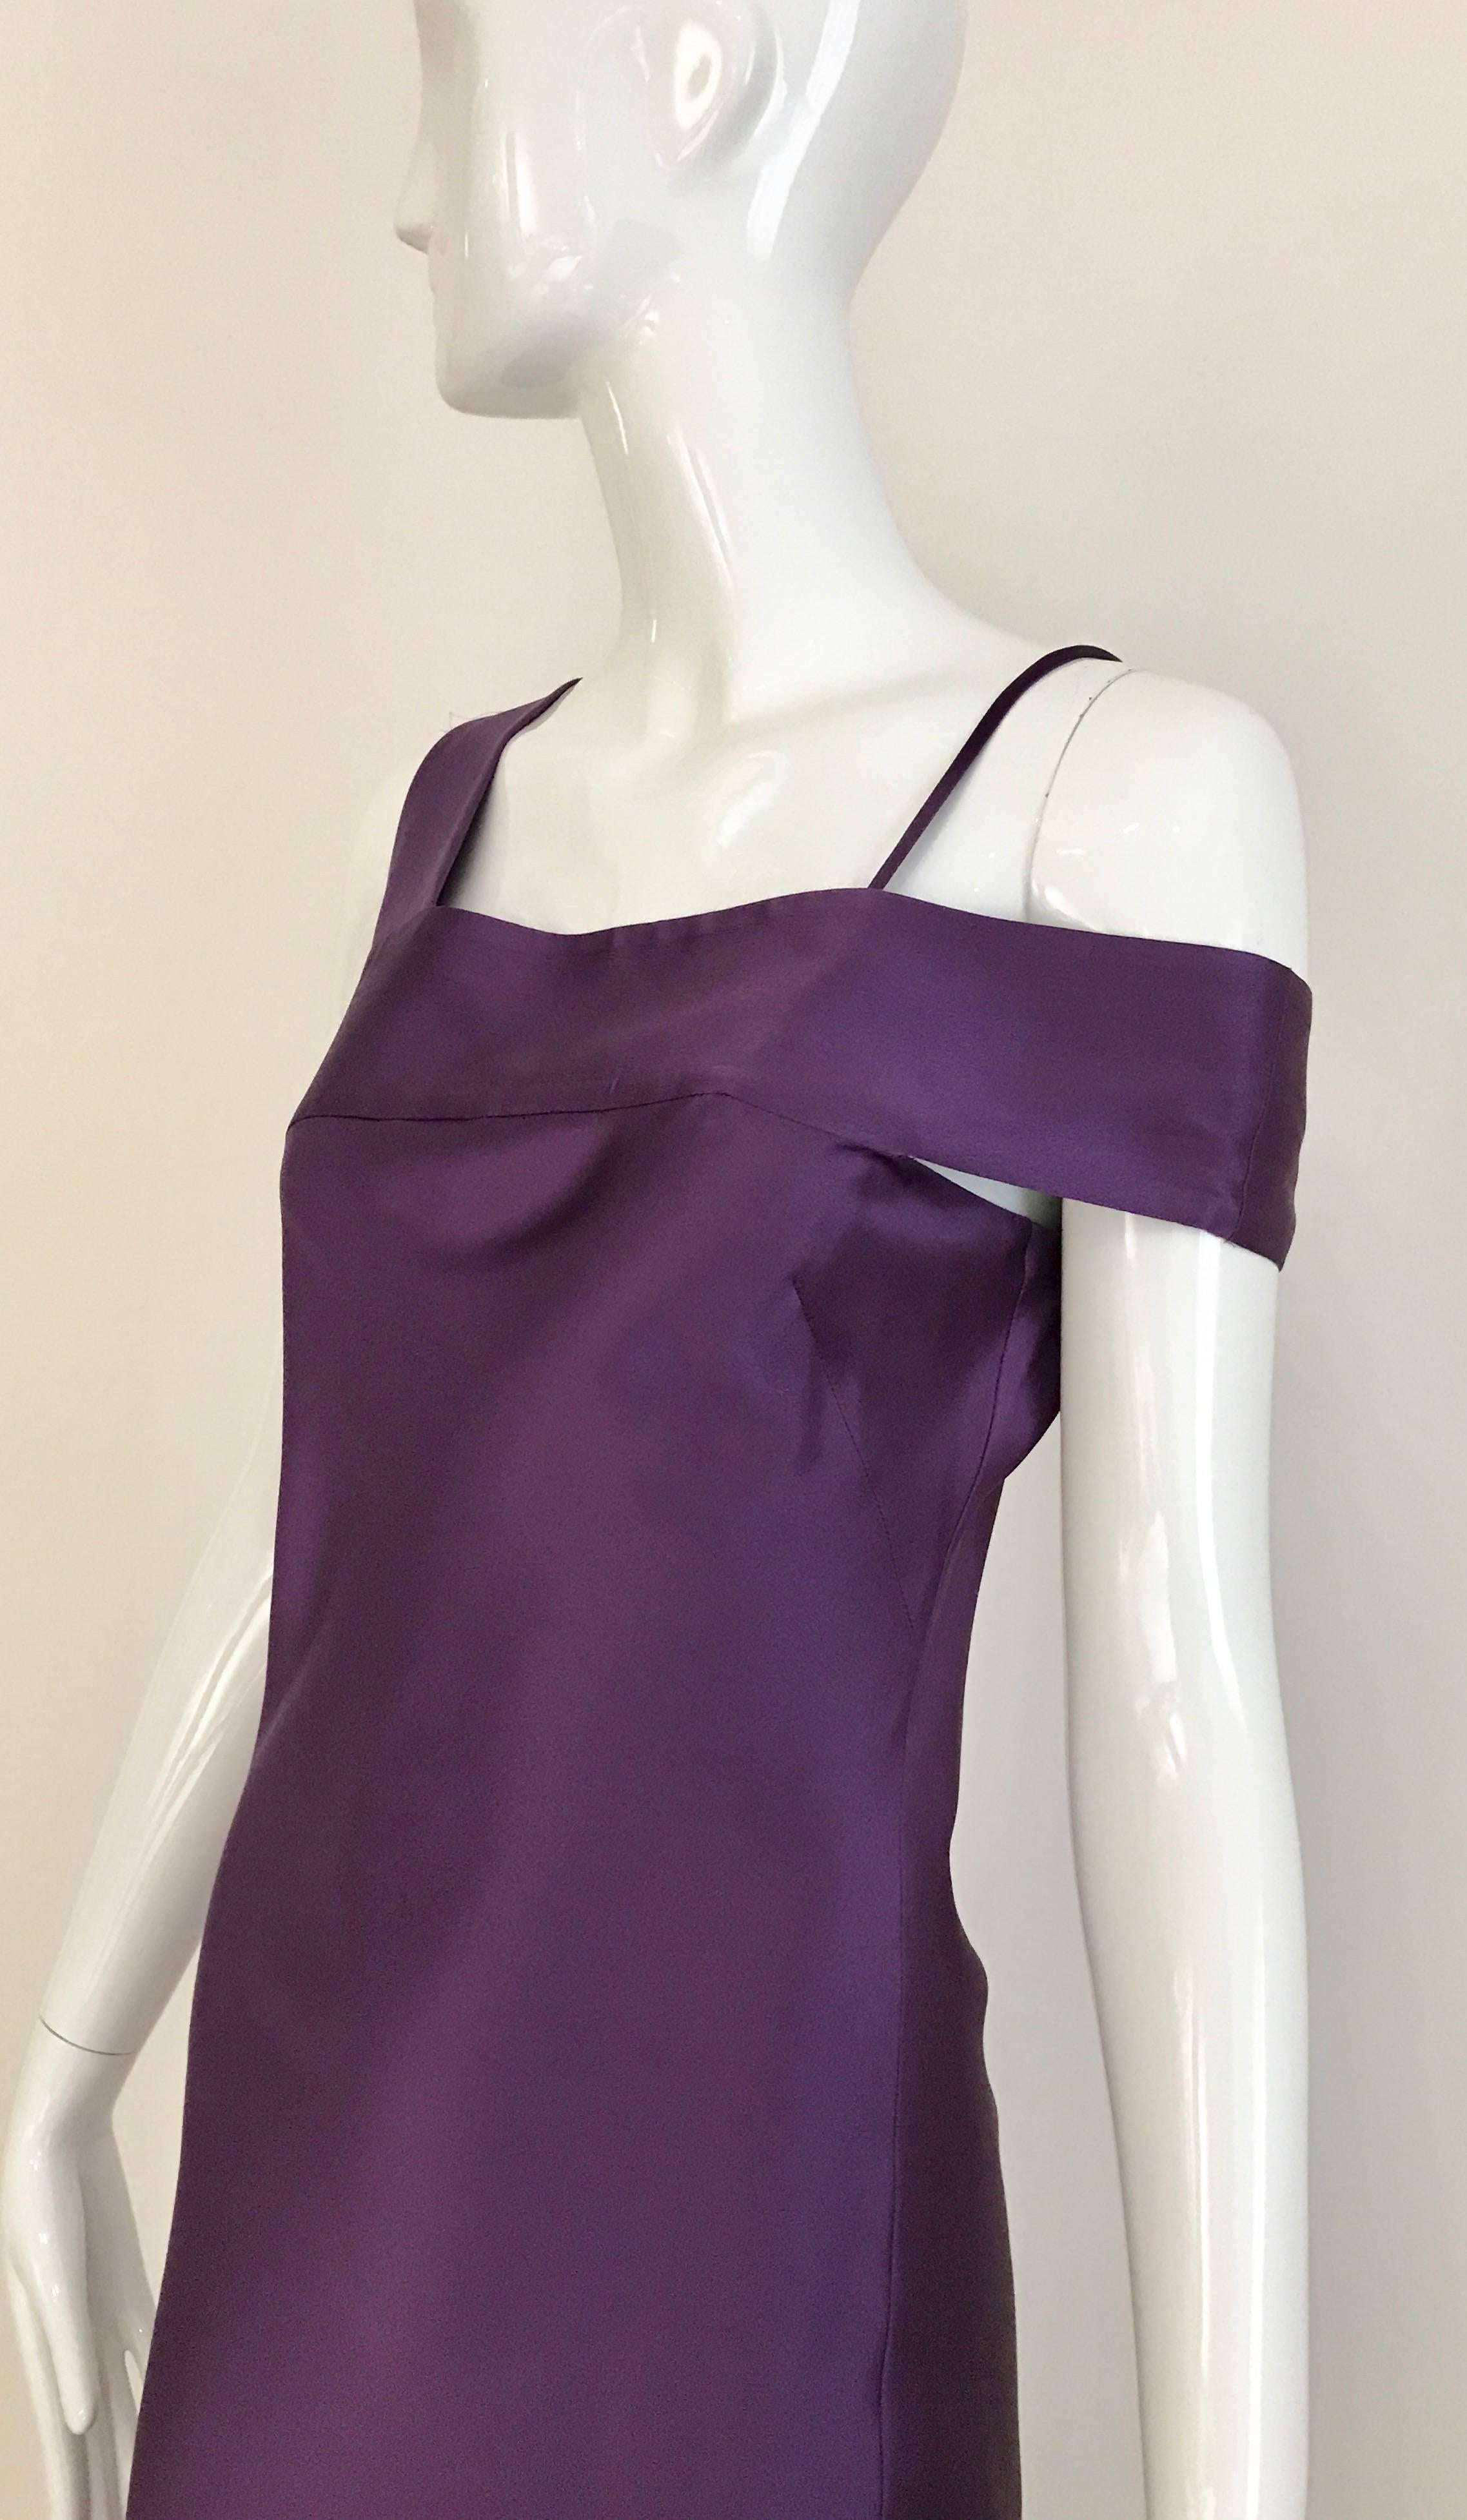 Alexander McQueen Violet Grecian Silk Gown with Asymmetrical Shoulder In Excellent Condition For Sale In Beverly Hills, CA